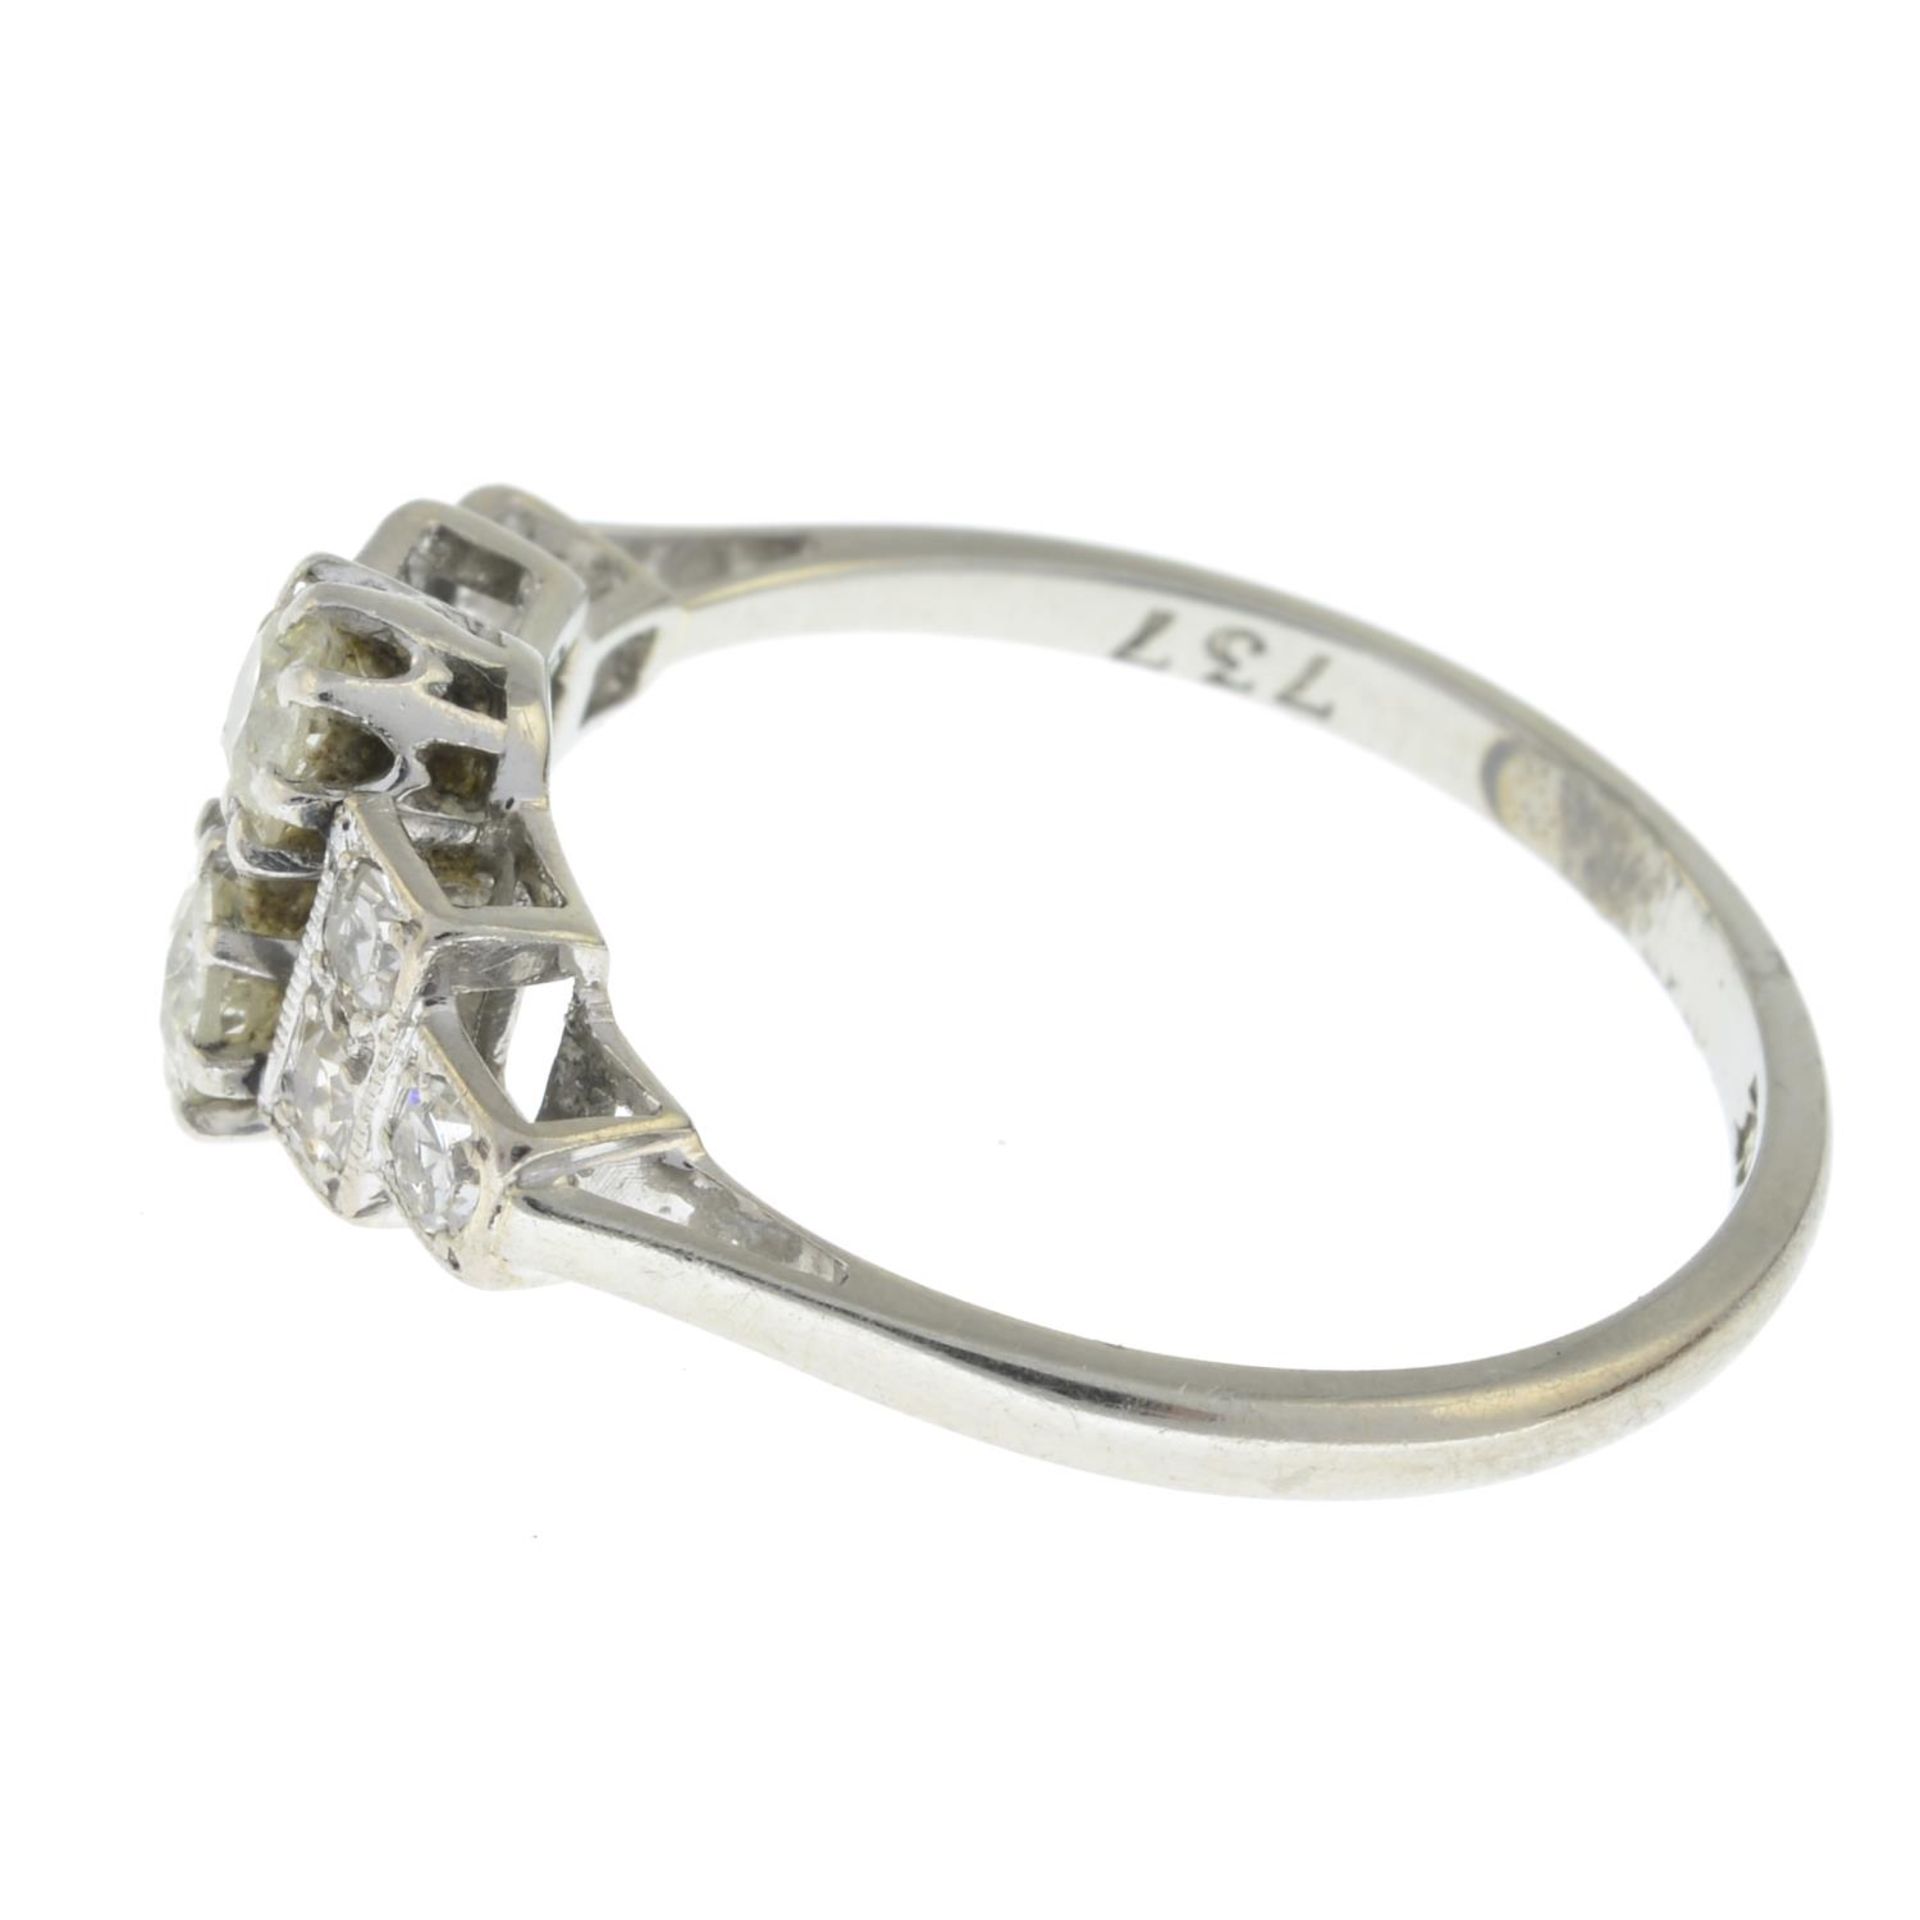 An Art Deco 18ct gold and platinum old-cut diamond two-stone ring, with single-cut diamond sides. - Image 3 of 3